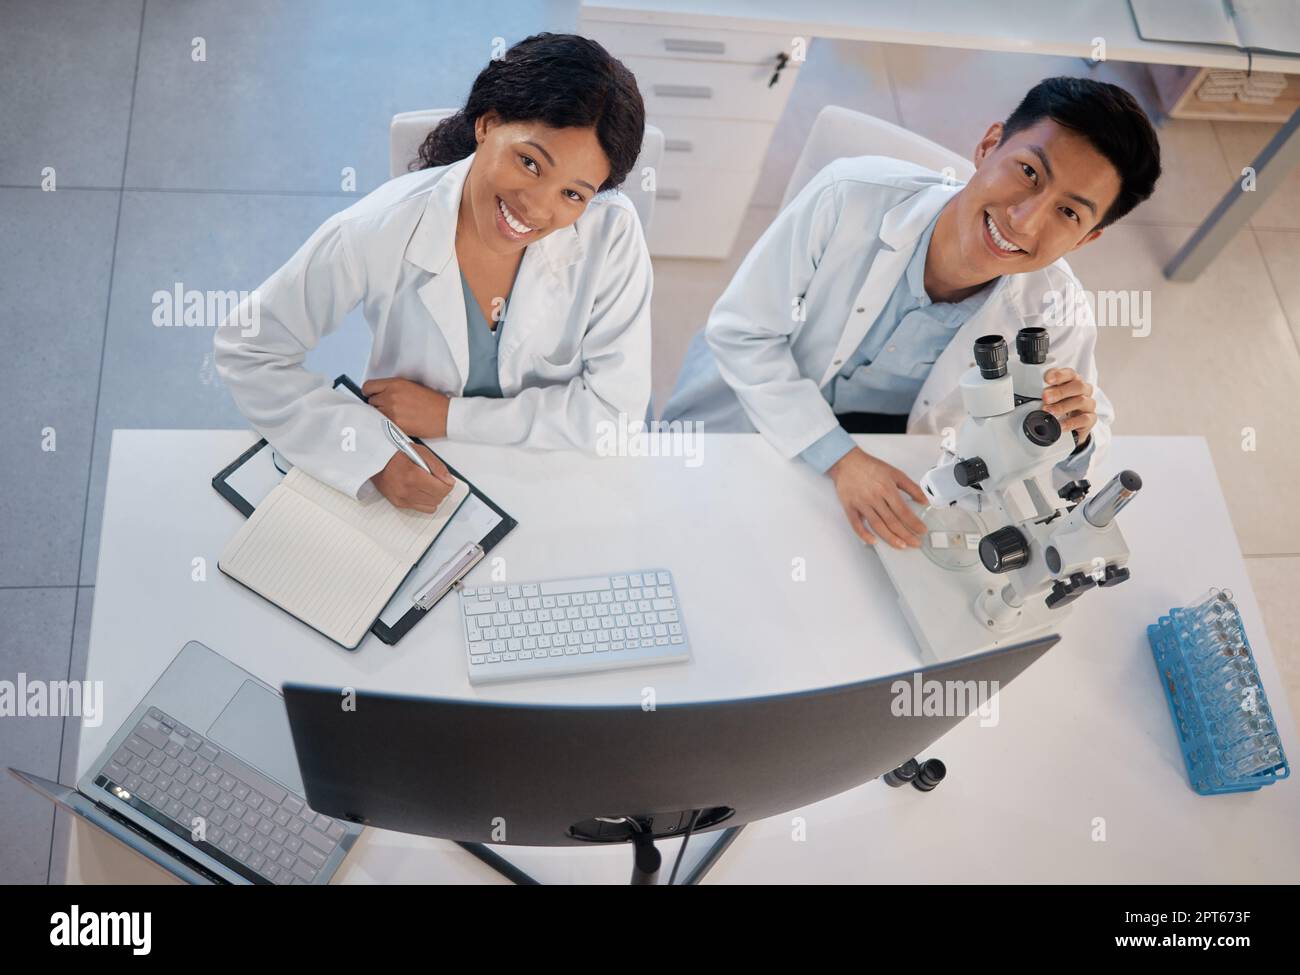 Working to make each other better. two lab workers together in their office Stock Photo